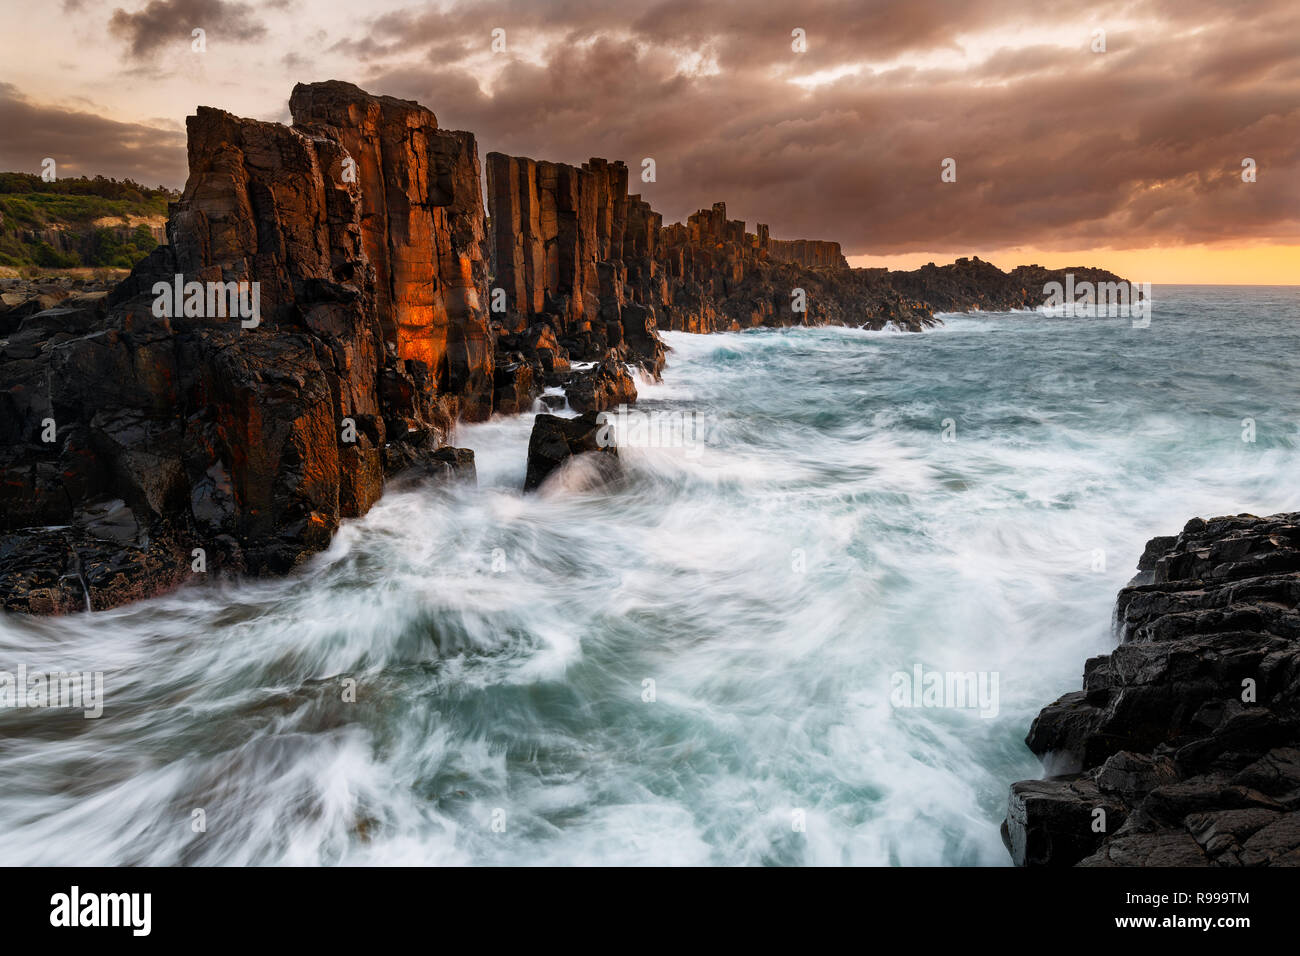 Bombo Quarry glowing in the first light of the day. Stock Photo